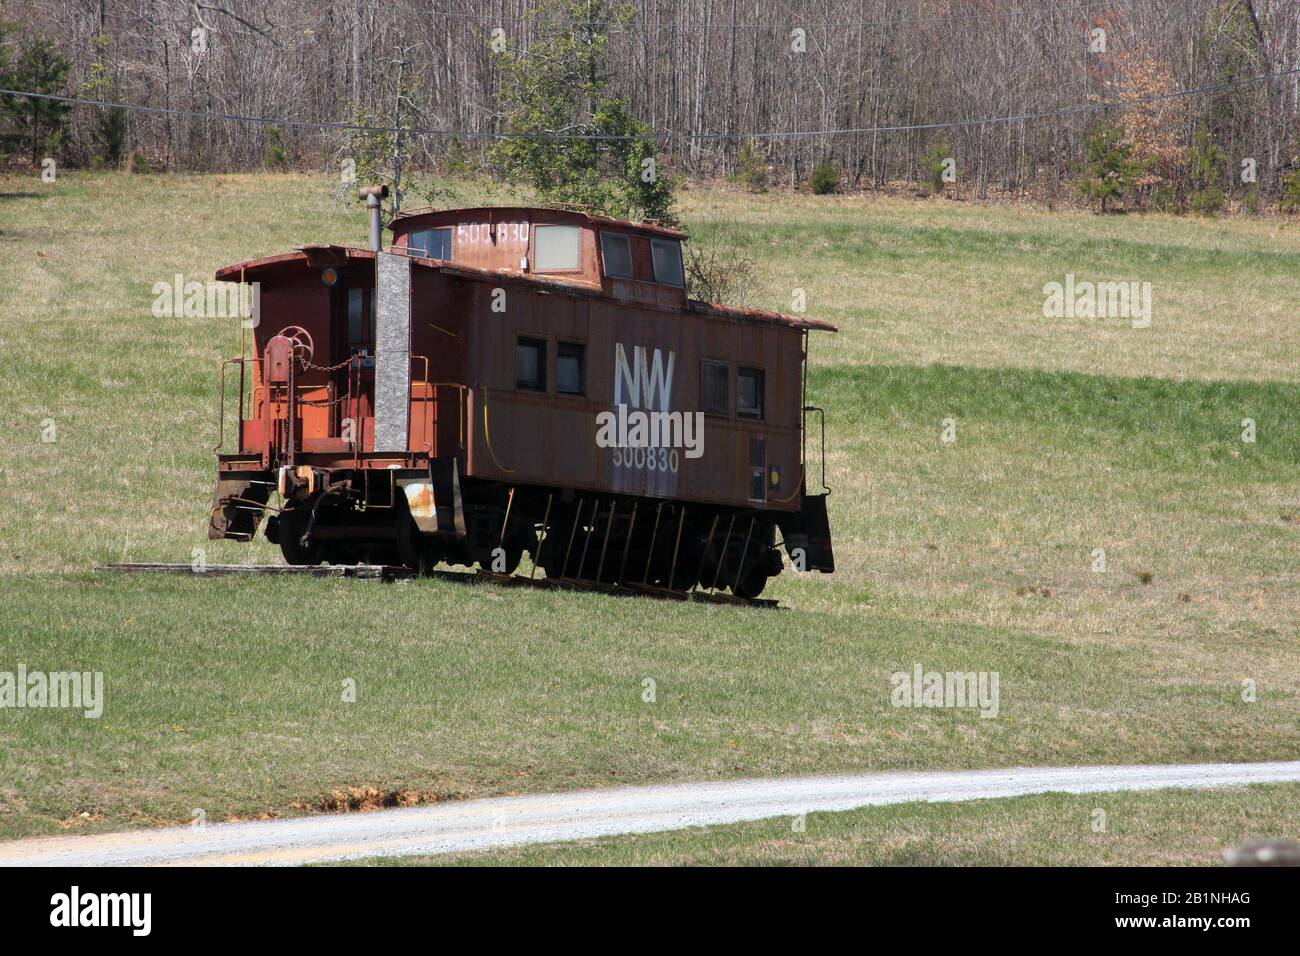 Retired caboose displayed in Virginia, USA Stock Photo